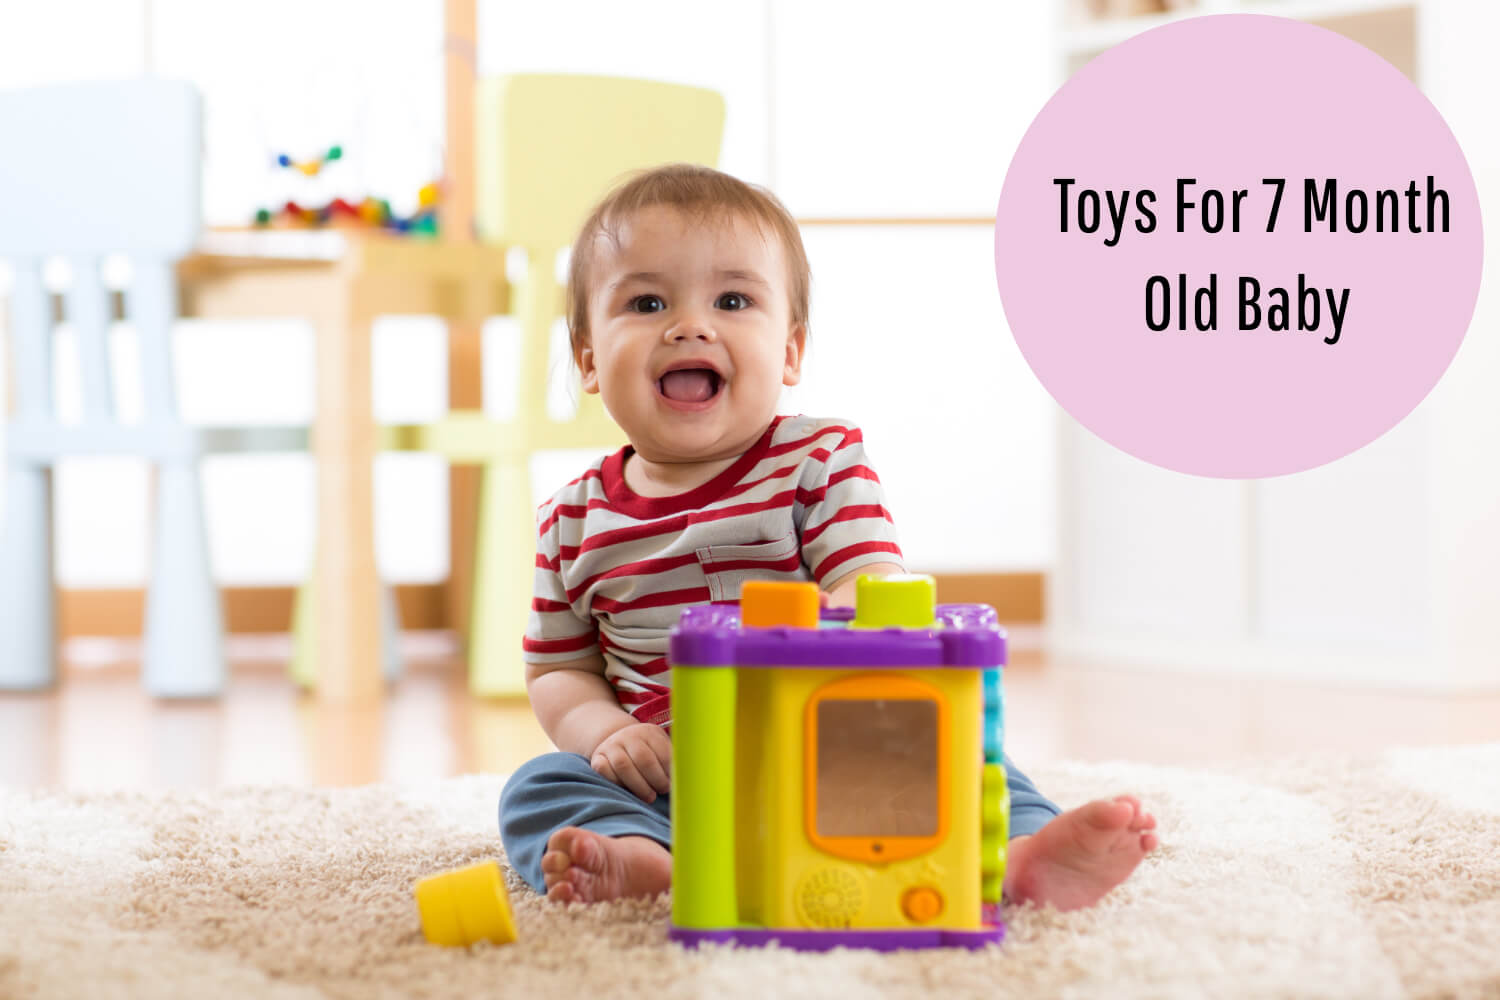 Toys for 7 month old baby